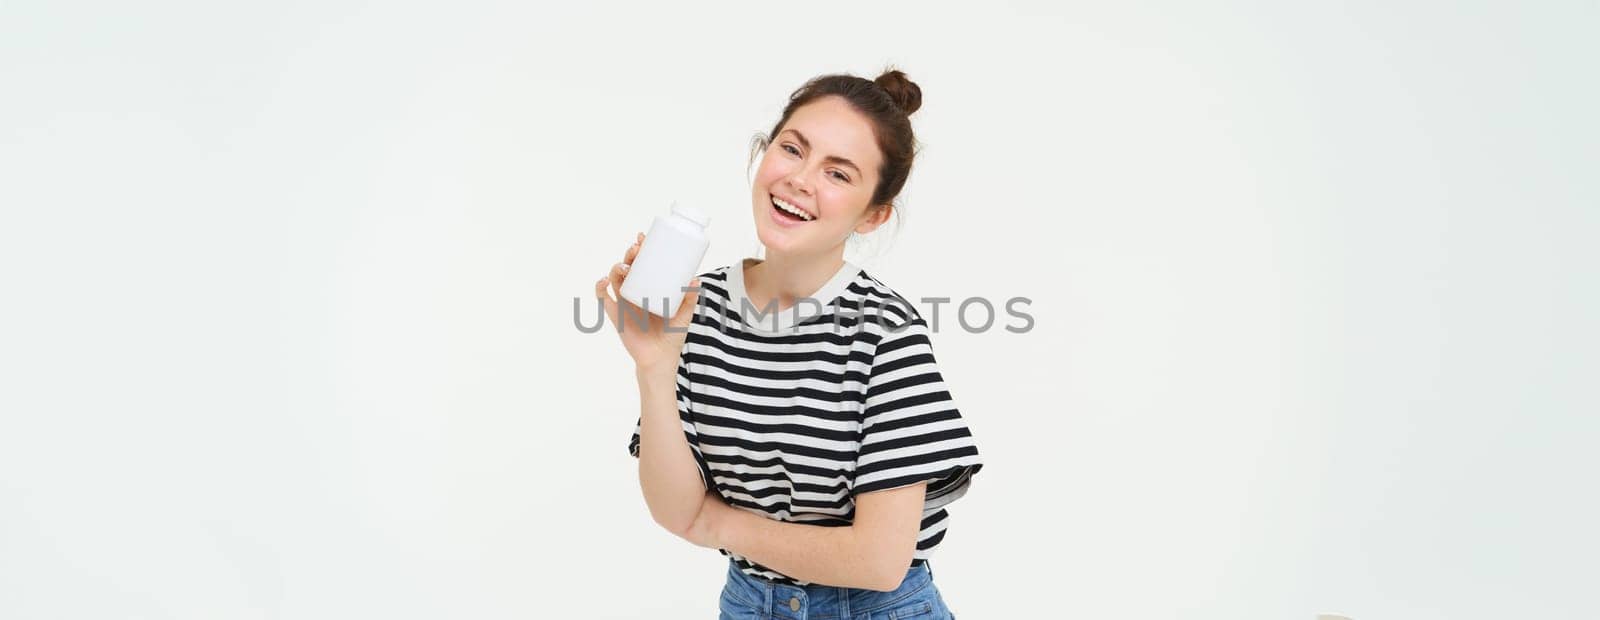 Healthcare and wellbeing. Young woman holding bottle with vitamins, dietary supplements, treatment for good skin and hair, standing over white background.